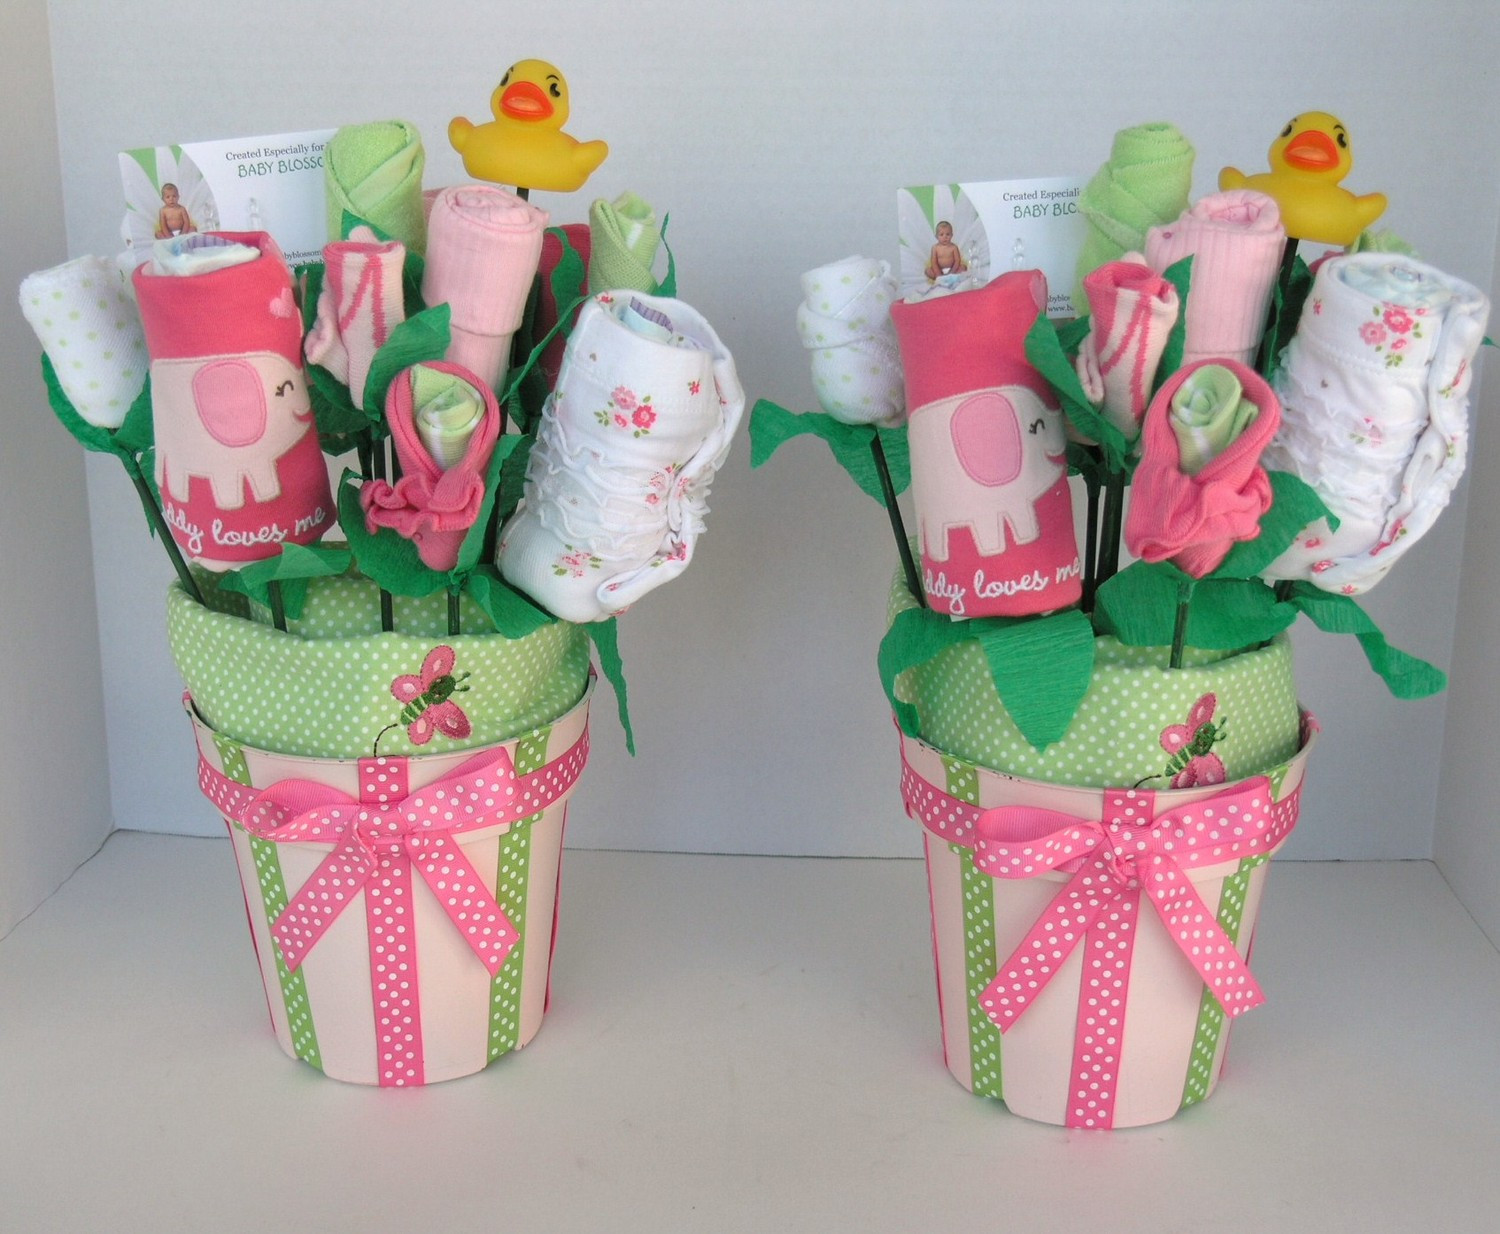 DIY Baby Gifts For Girl
 Five Best DIY Baby Gifting Ideas for The Little Special